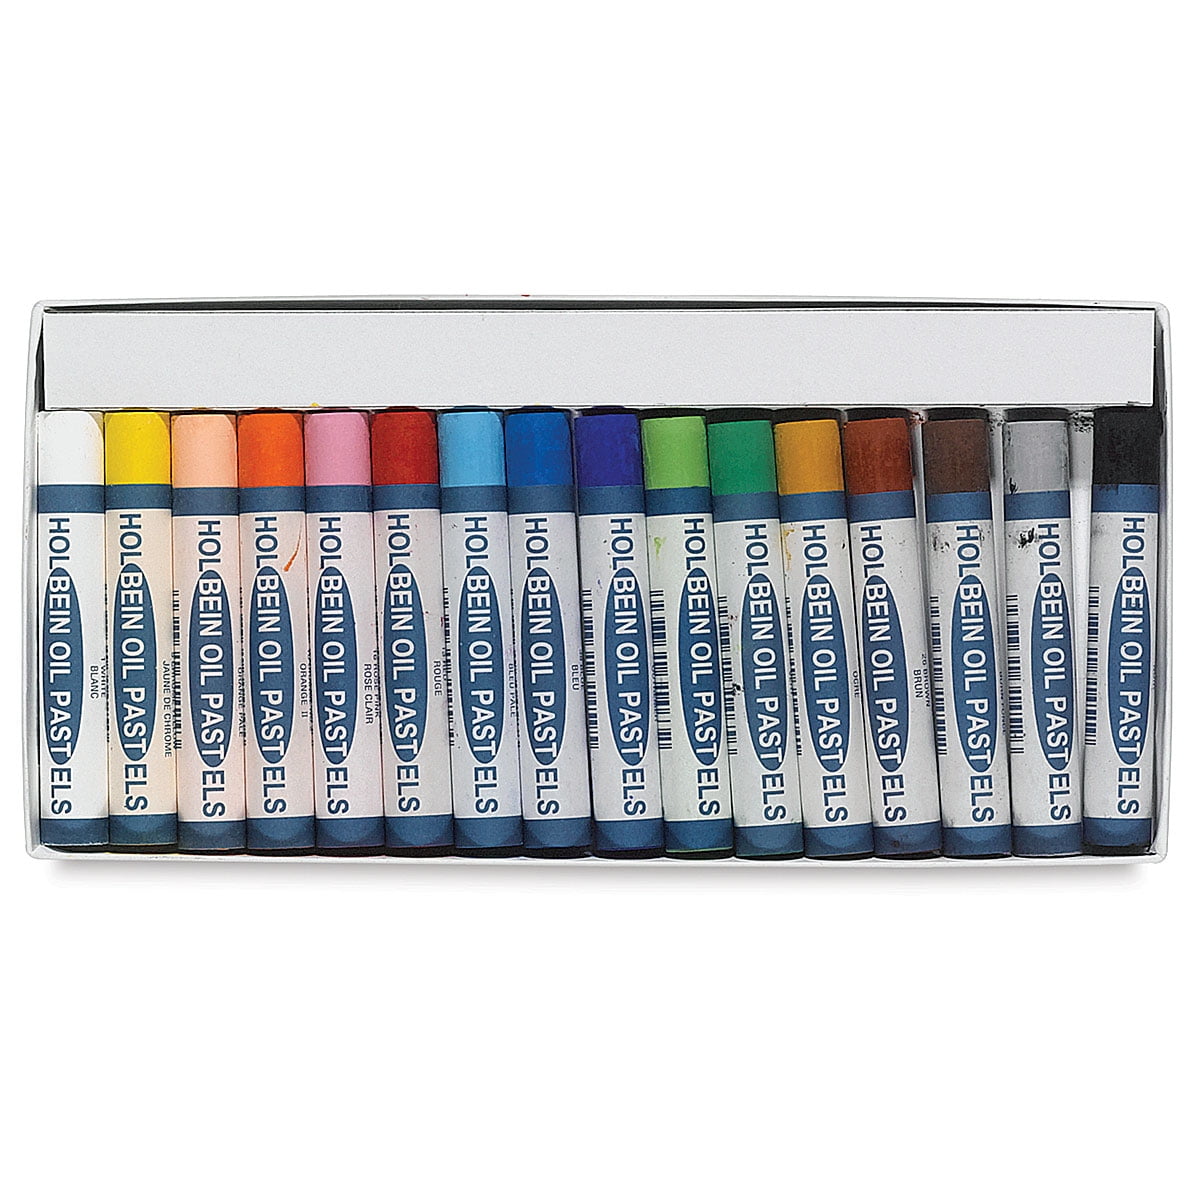 Mungyo Gallery Artists' Soft Oil Pastels - Set of 120, Wooden Box